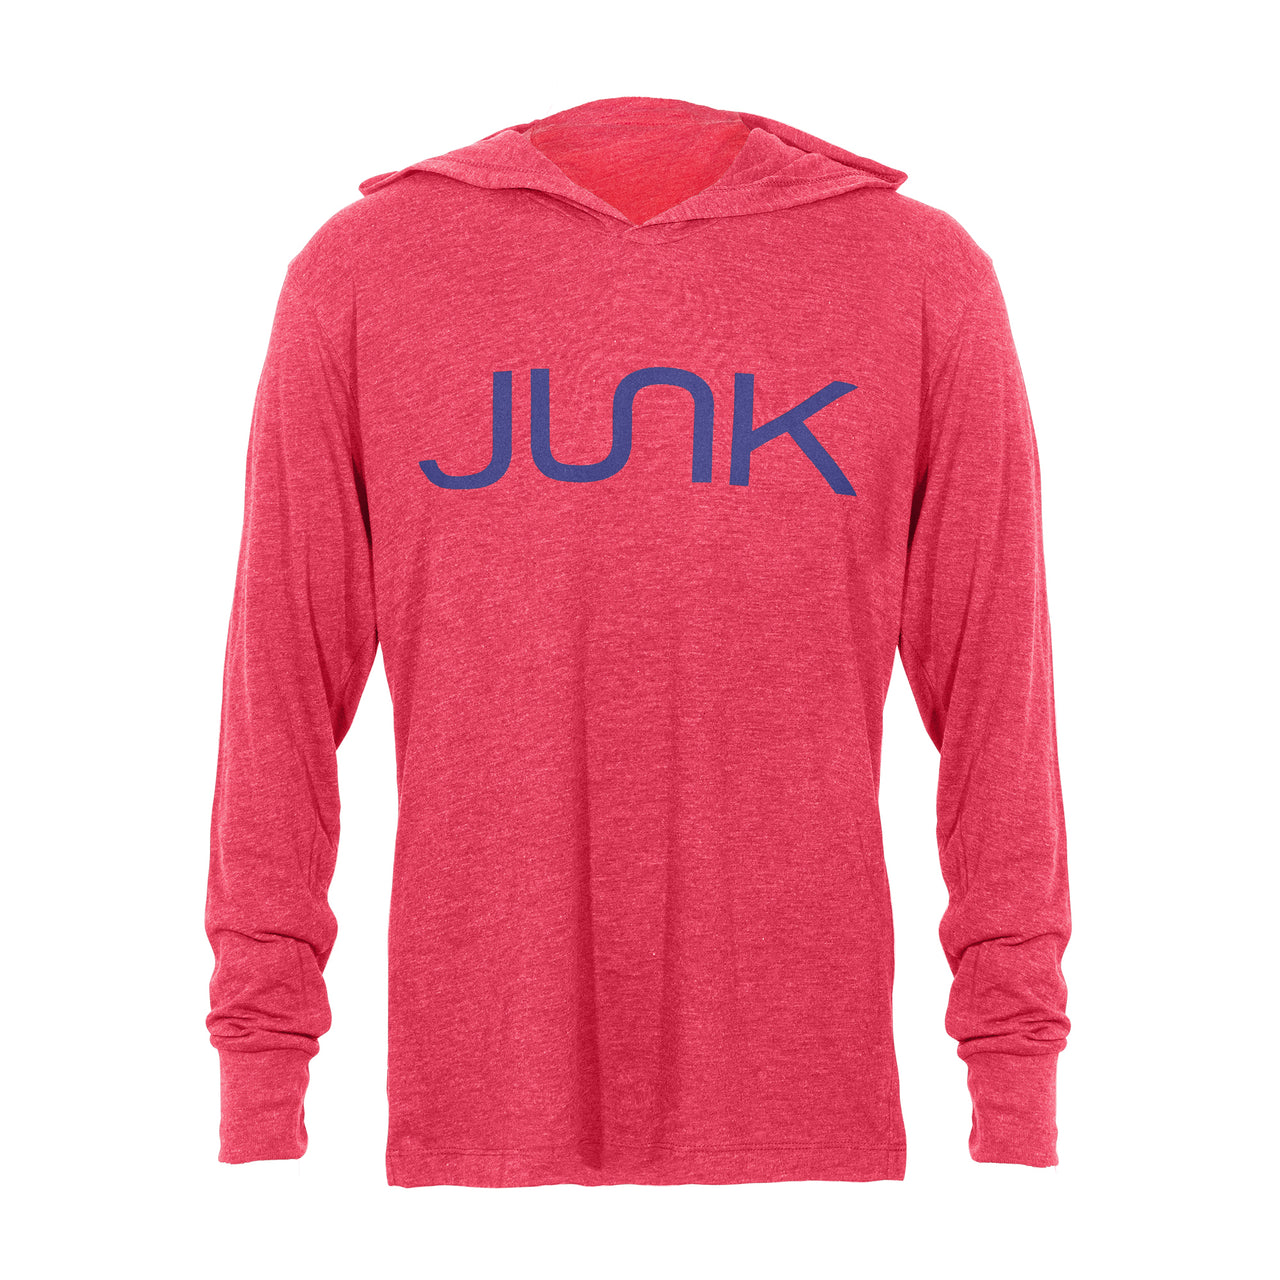 JUNK Tri-Blend Red Hooded Tee - View 1